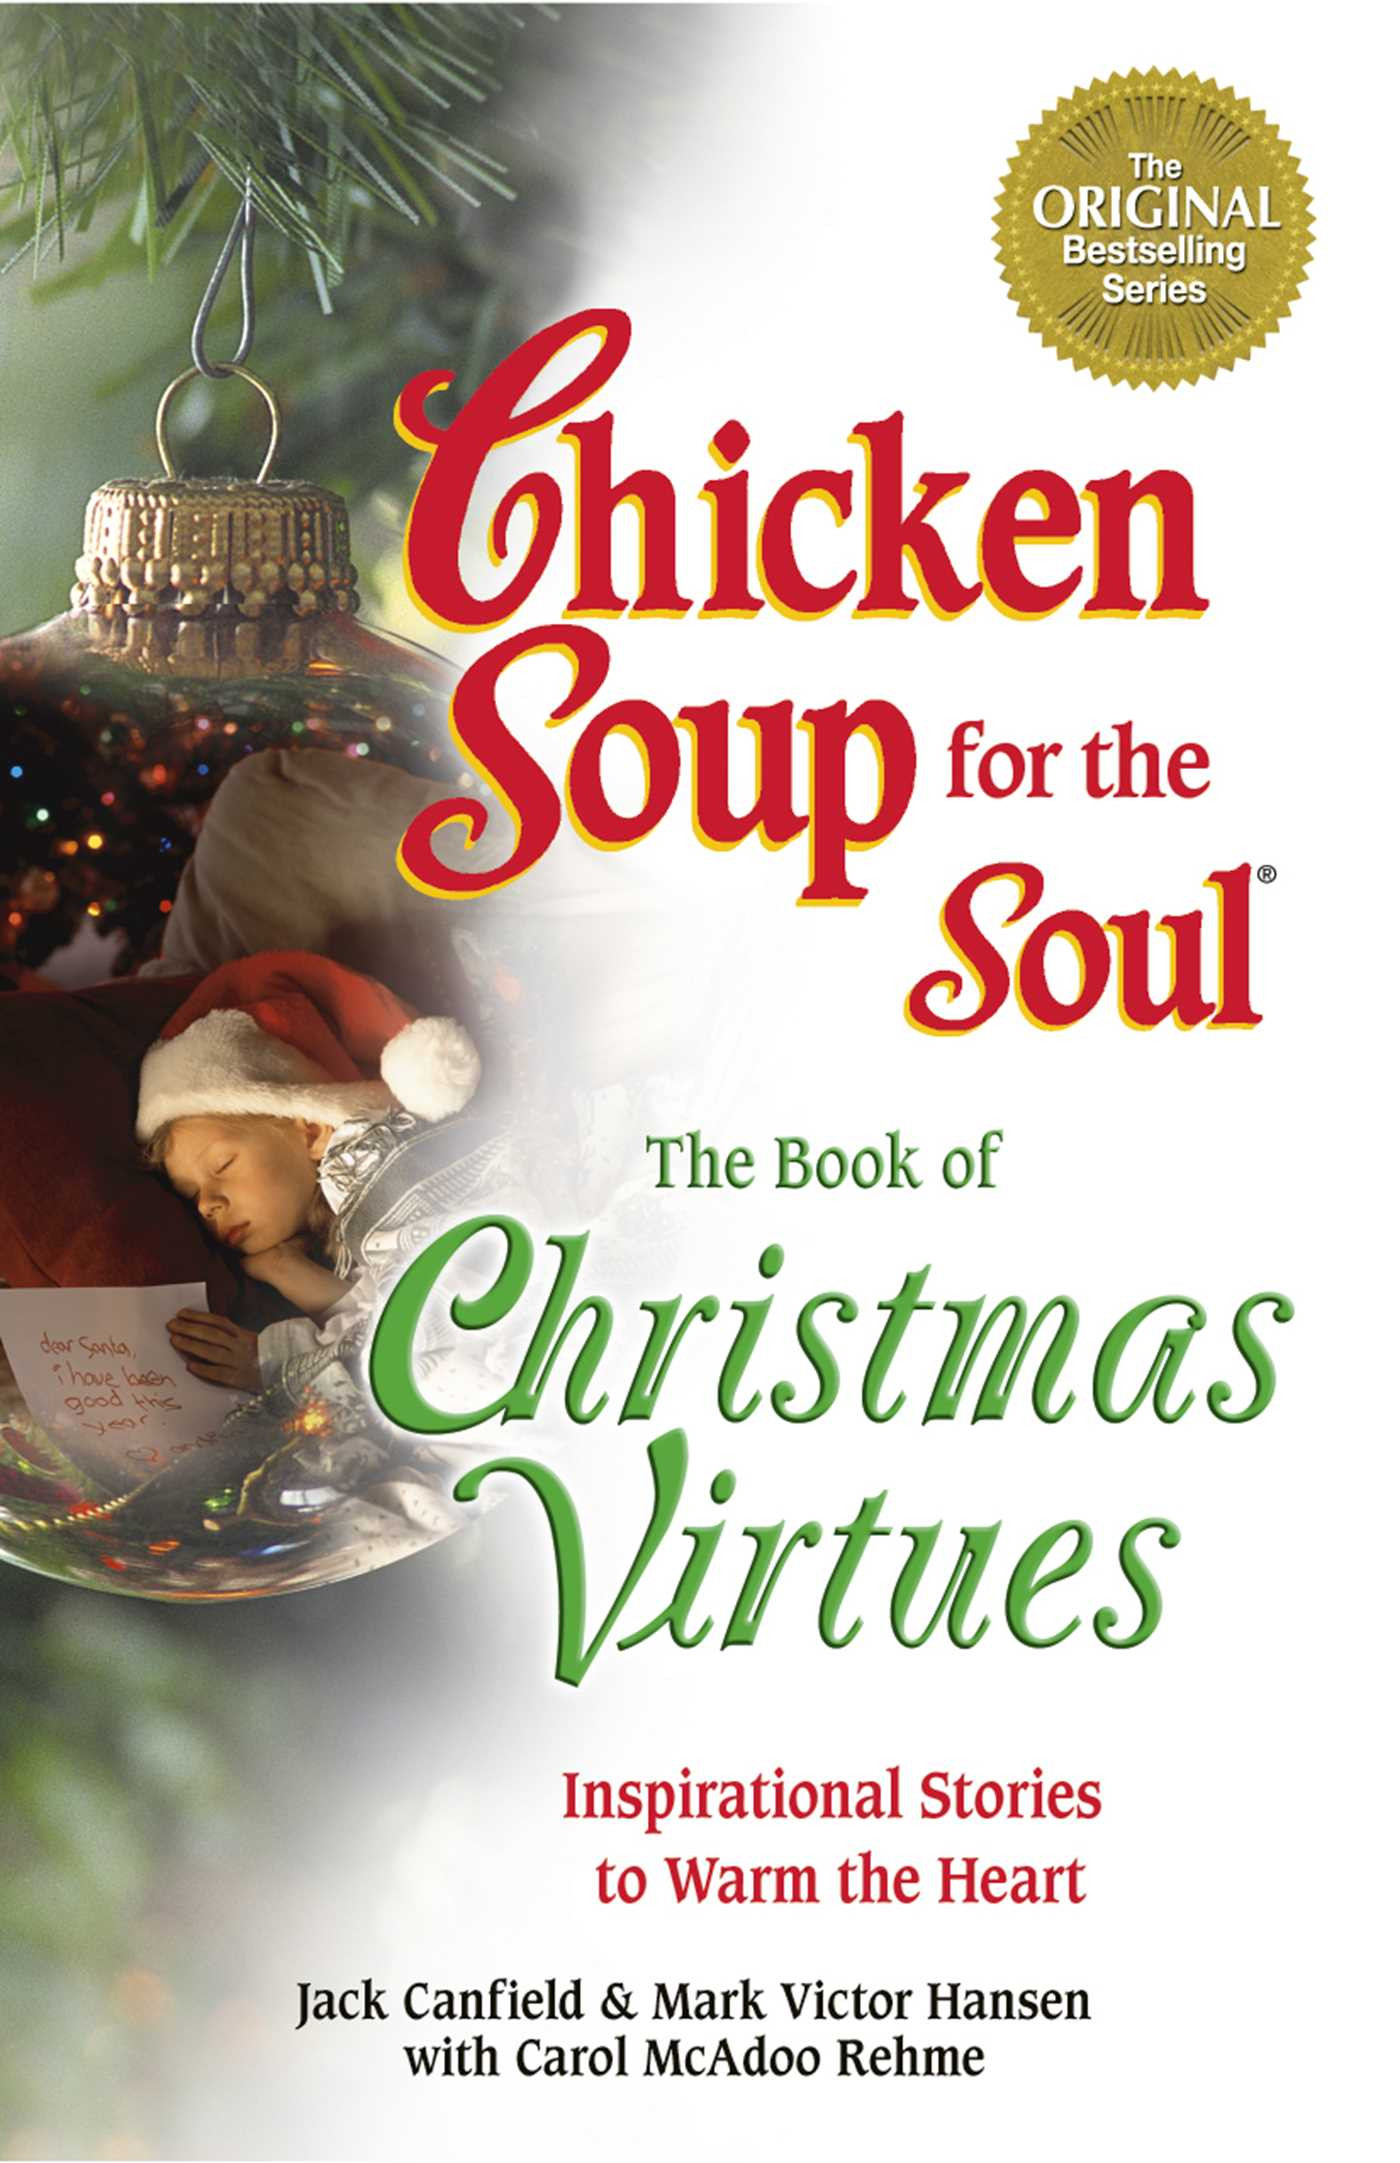 Chicken Soup For The Soul Christmas
 Chicken Soup for the Soul The Book of Christmas Virtues